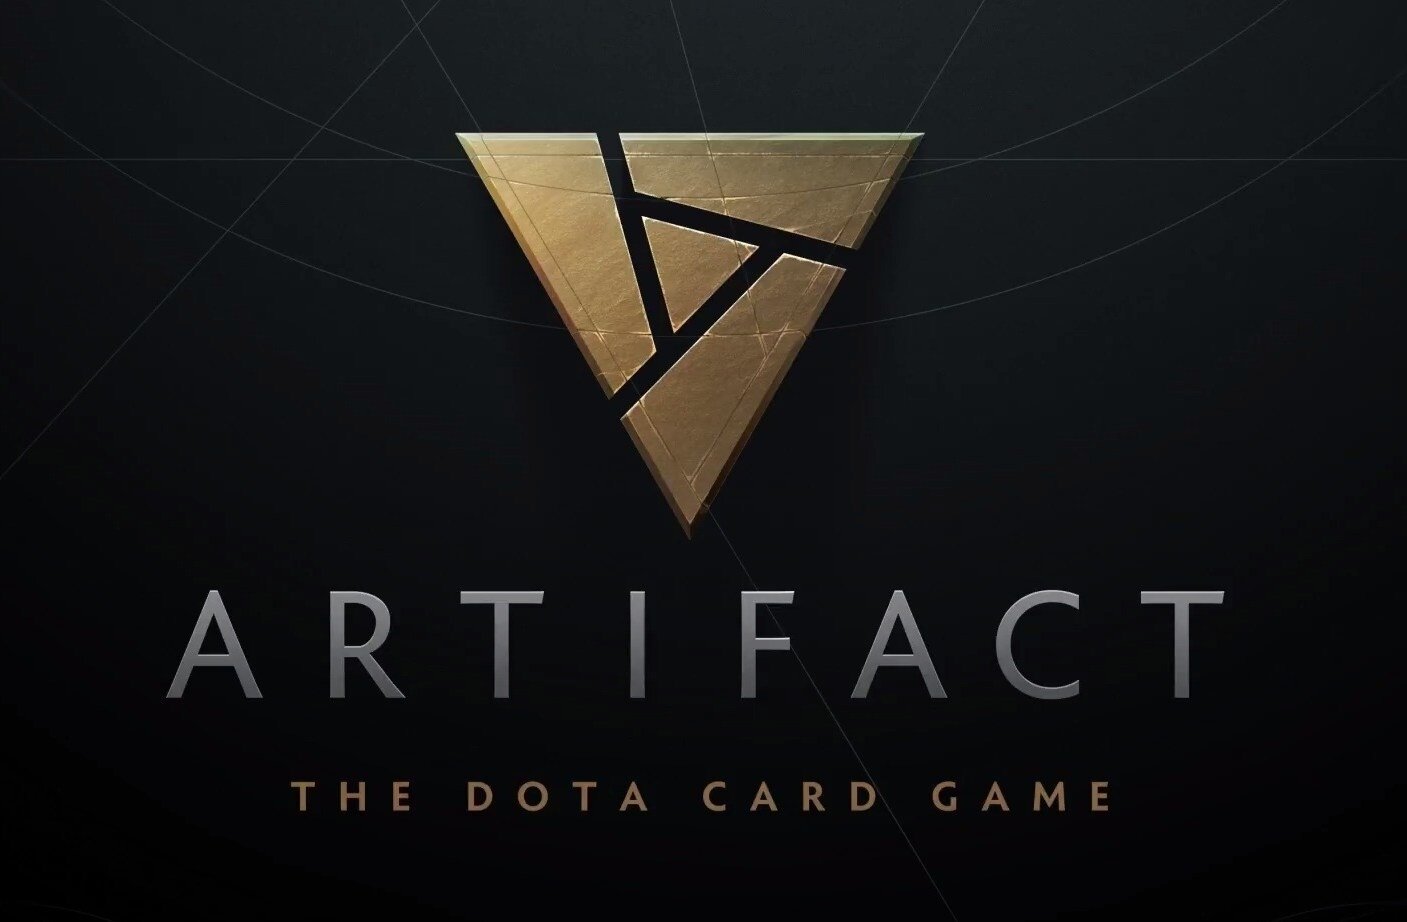 Artifact, thee upcoming “digital collectible card game based on Dota 2” looks interesting but is it too complicated?